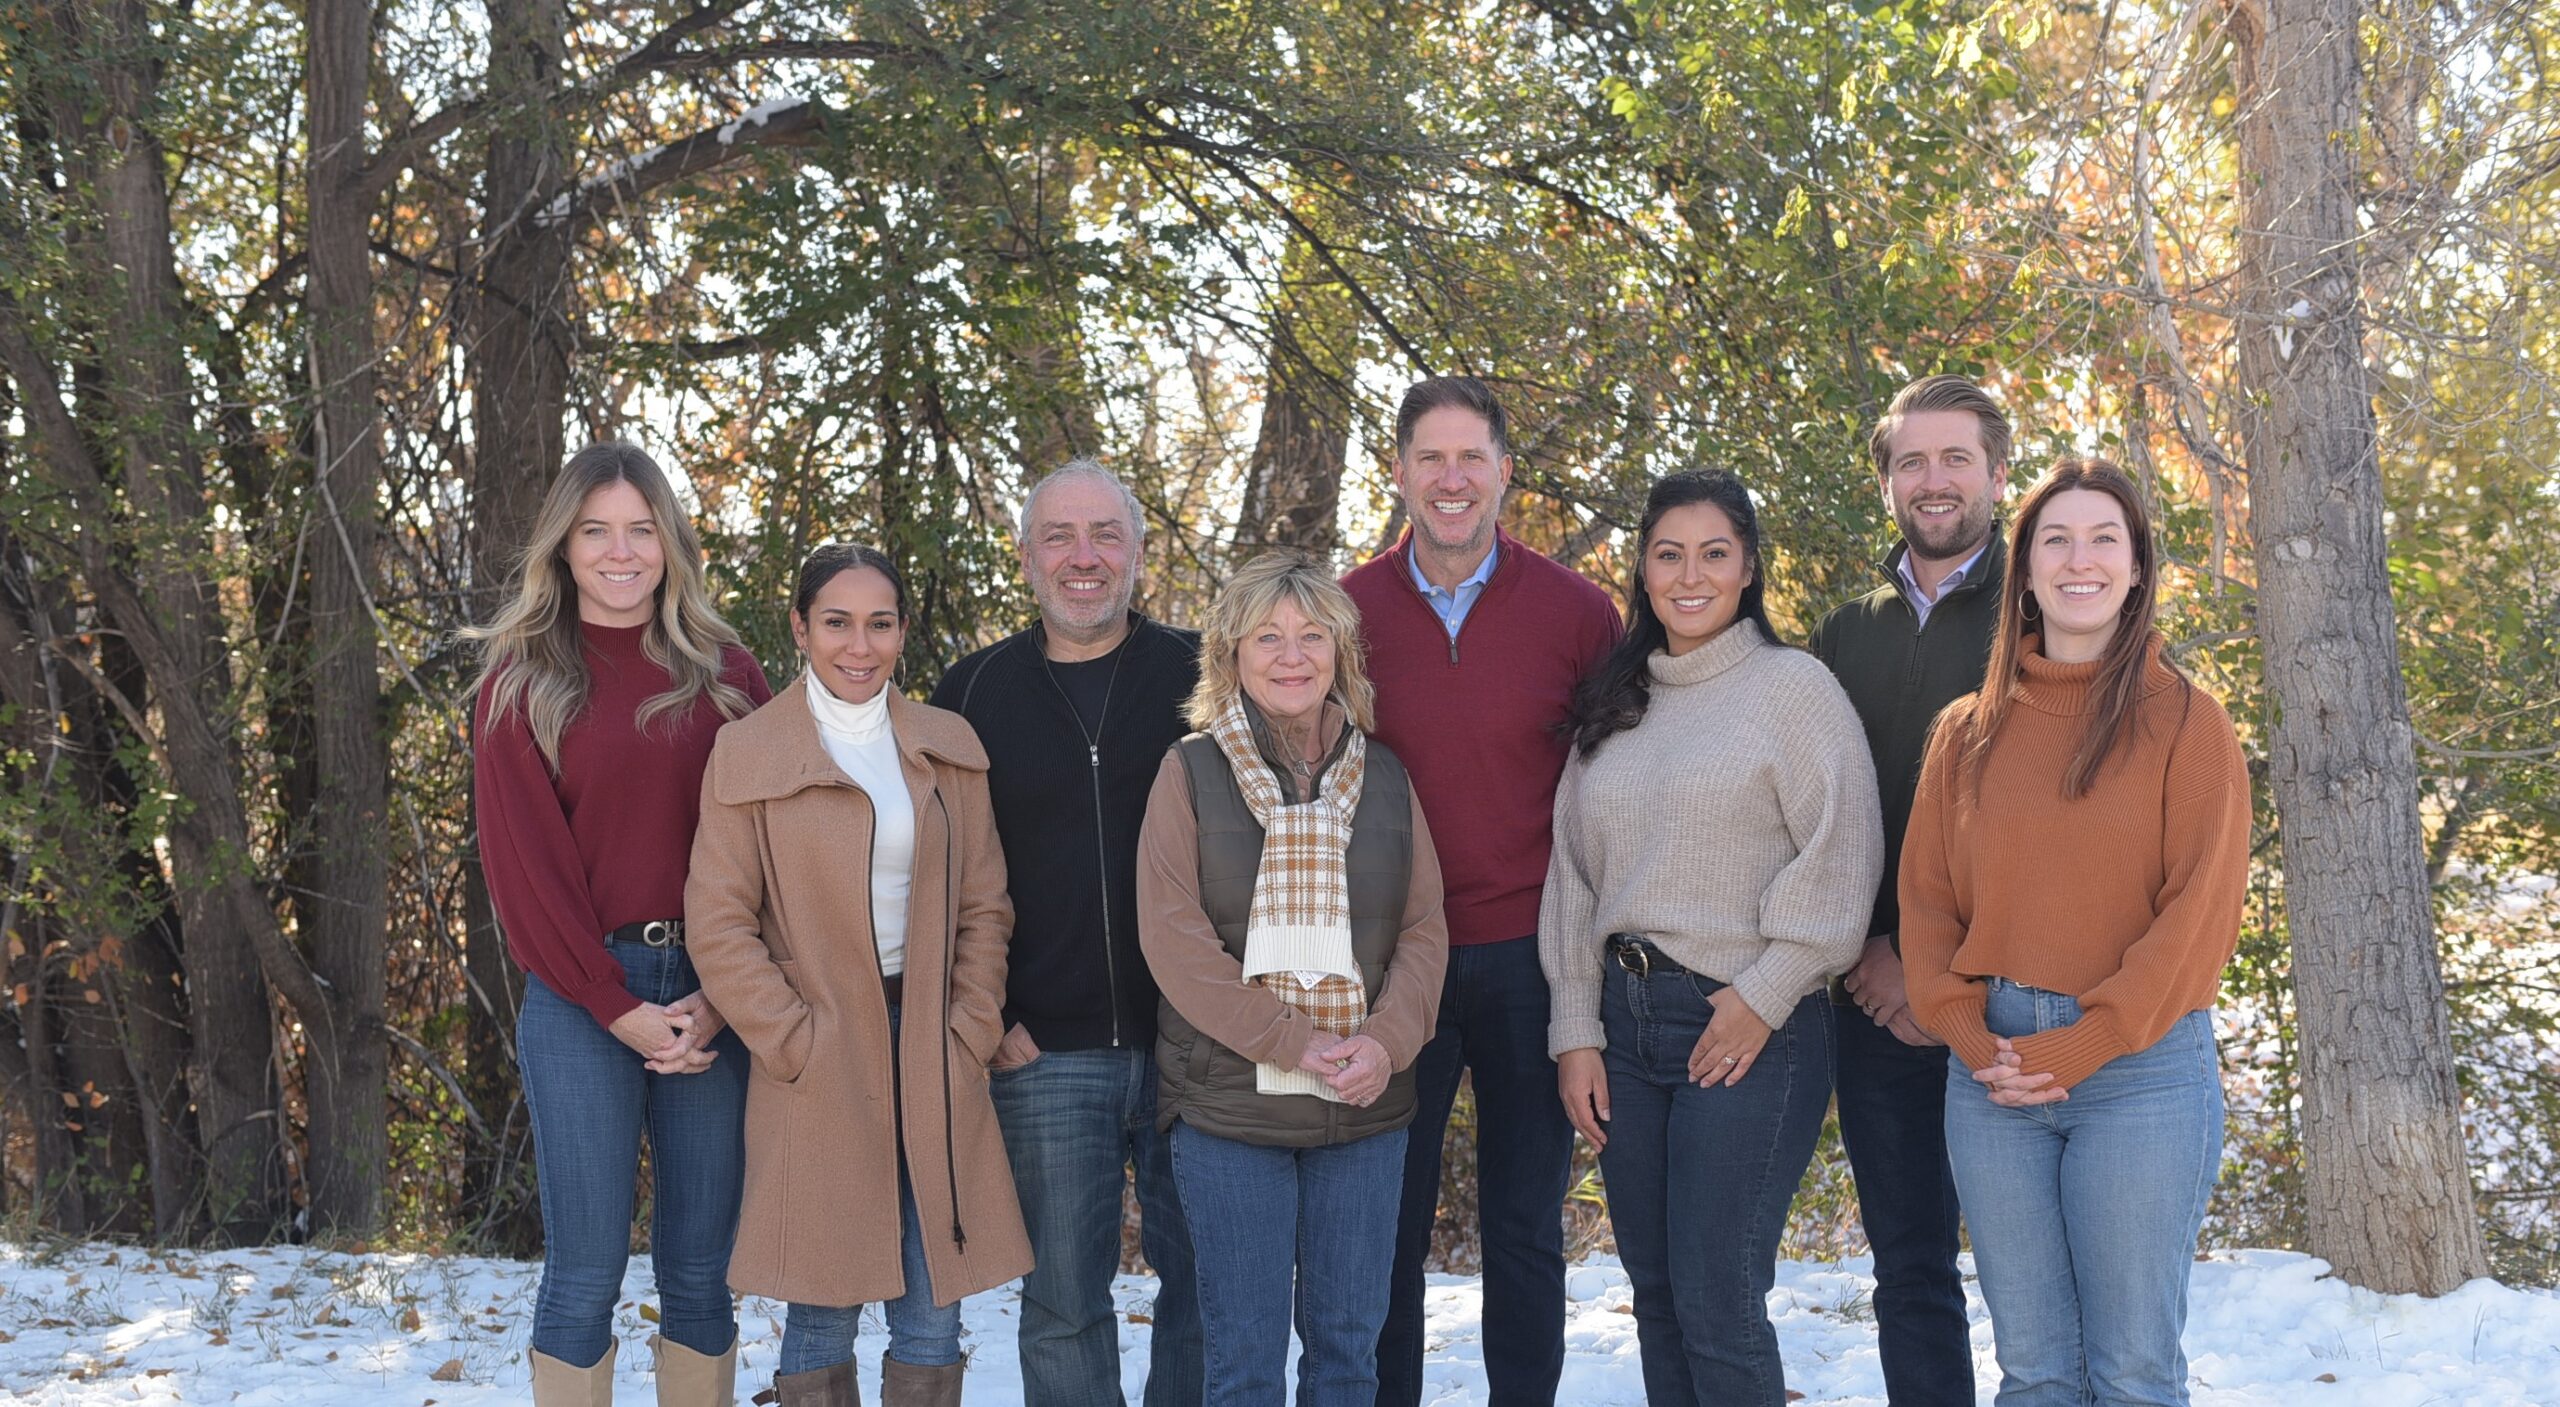 The Doyle Group Team's holiday photo shows the dynamic that made them one of the best places to work.